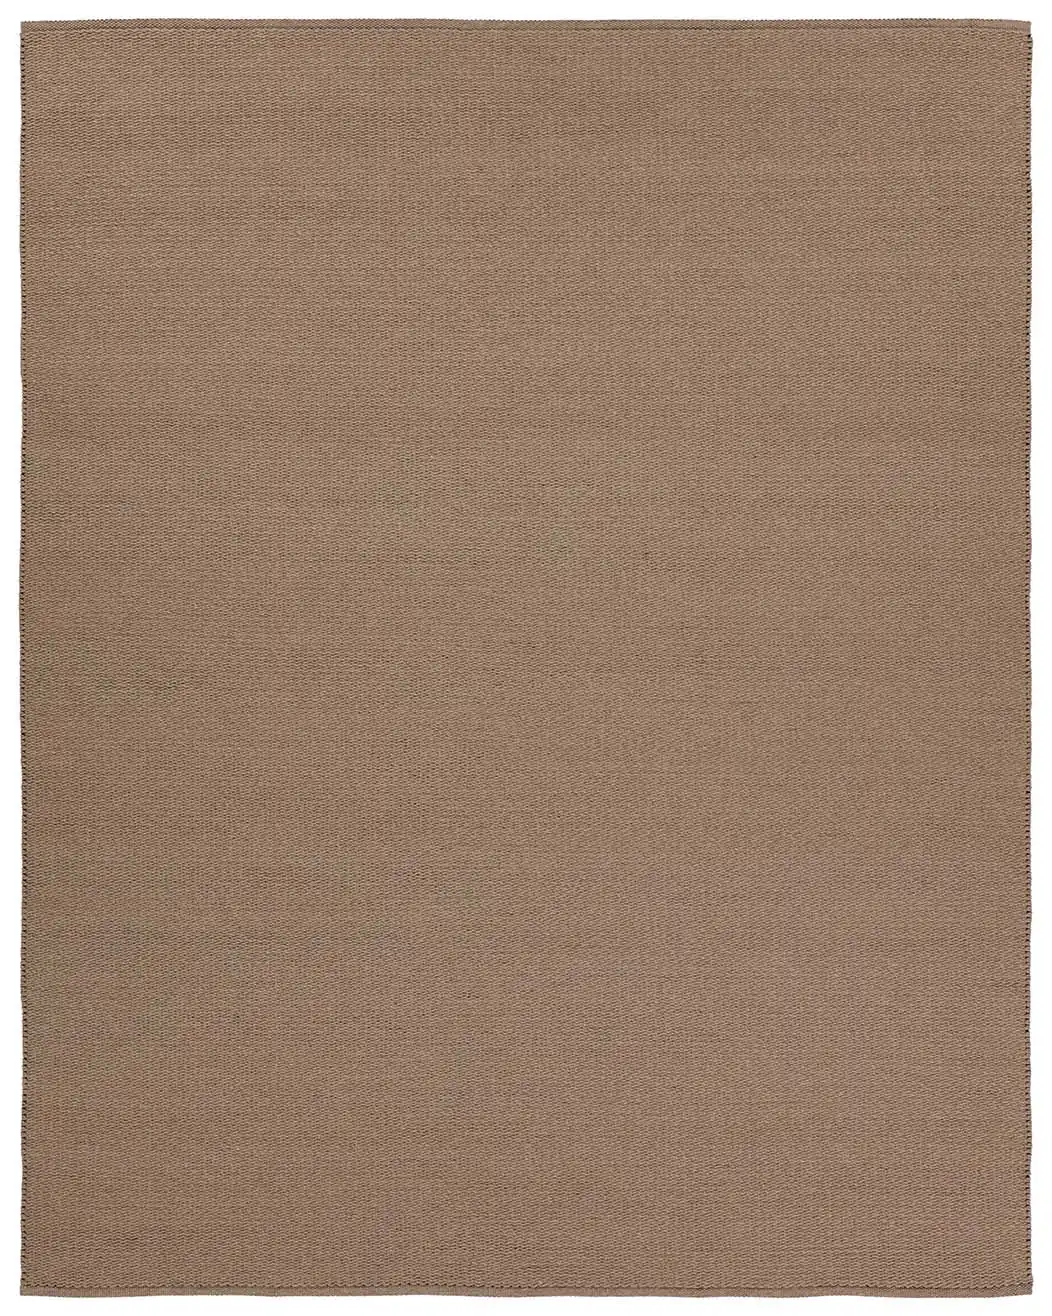 Jaipur Living Ryker Handmade Indoor/Outdoor Solid Taupe Area Rug  Product Image